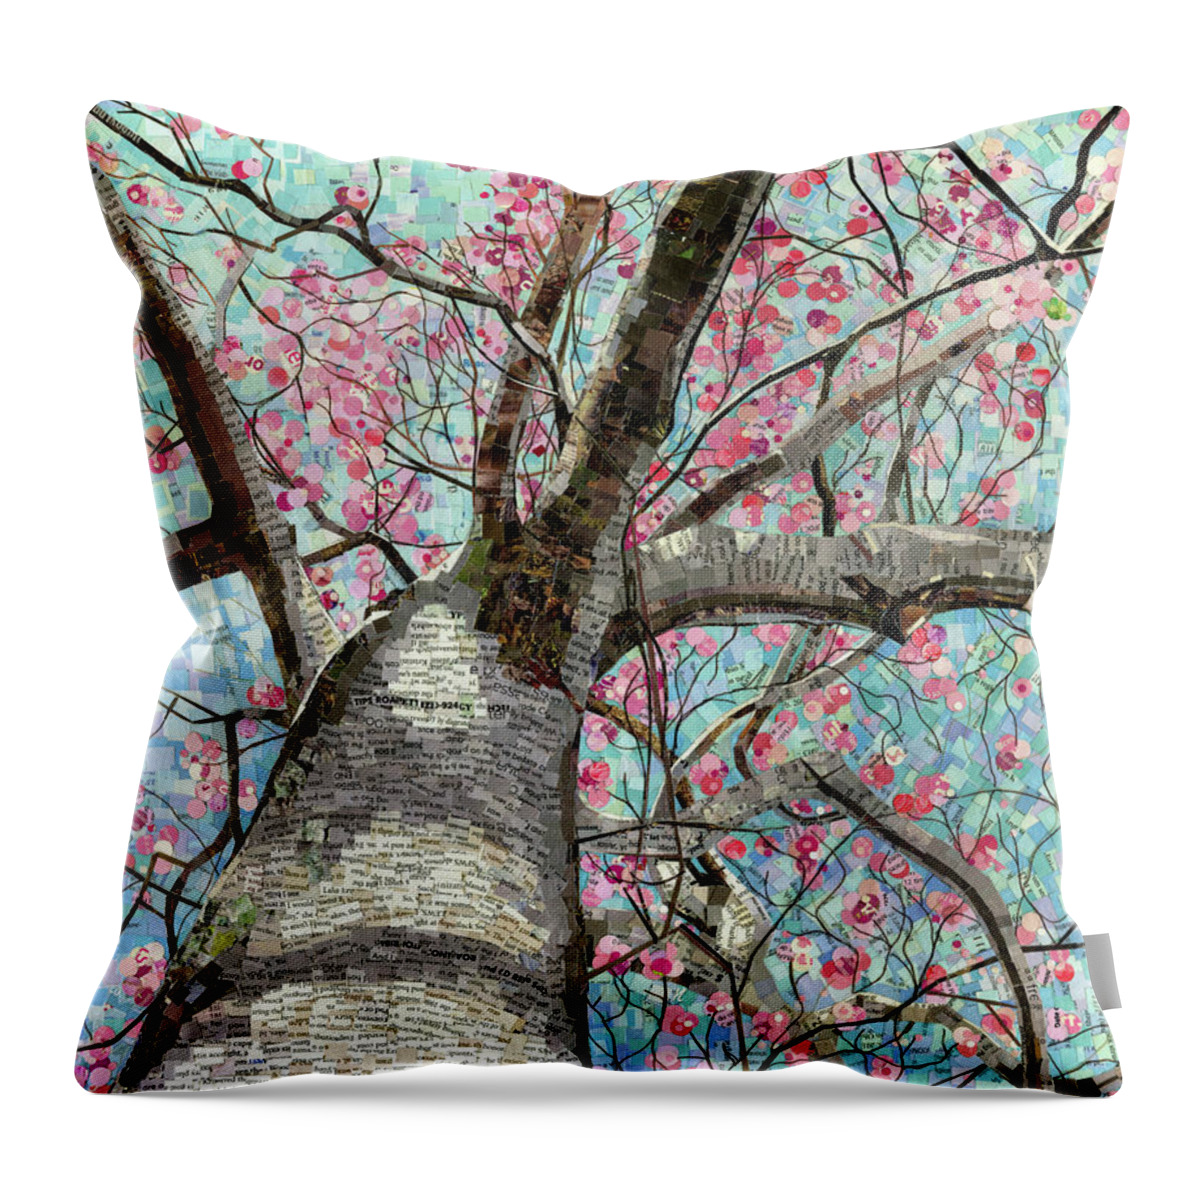 Magazine Collage Throw Pillow featuring the mixed media Paper Magnolias by Shawna Rowe